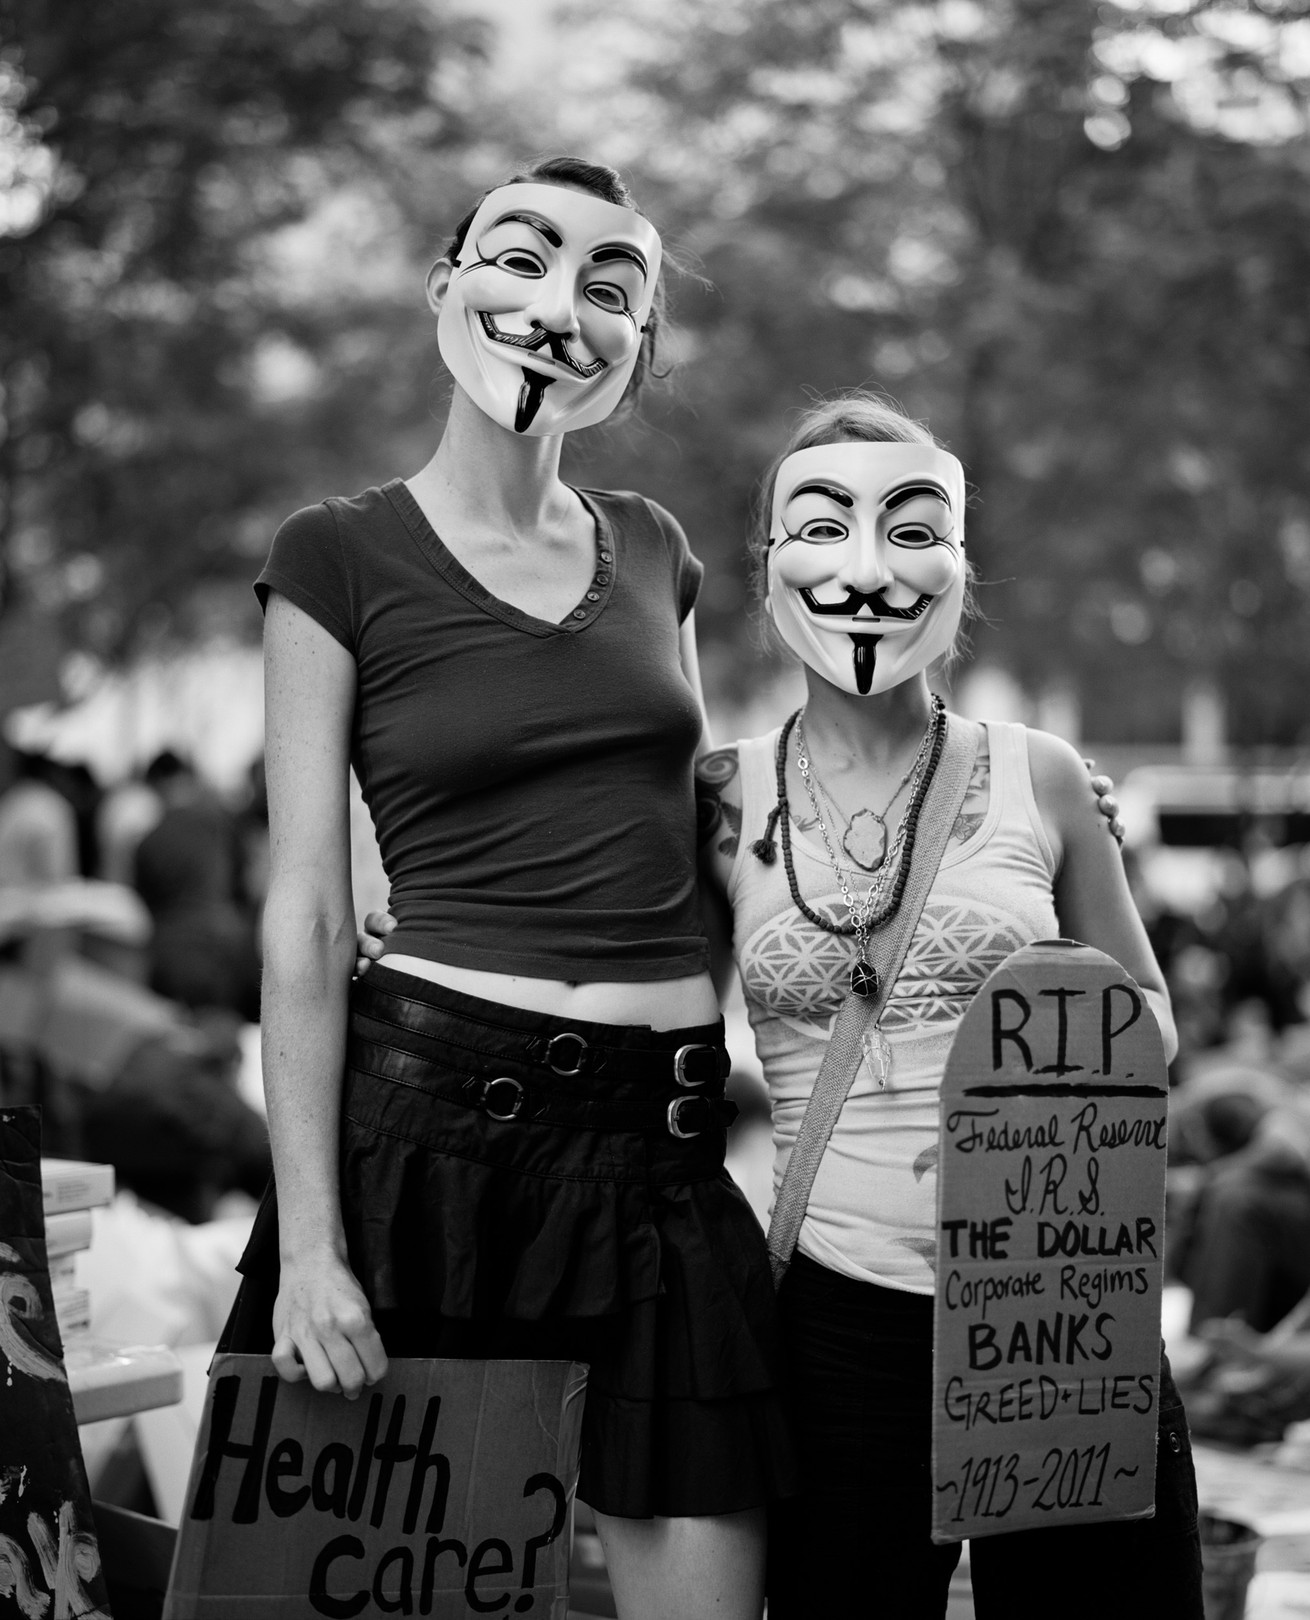 Protesters in Zuccotti Park, New York (Brian Shumway / Redux)